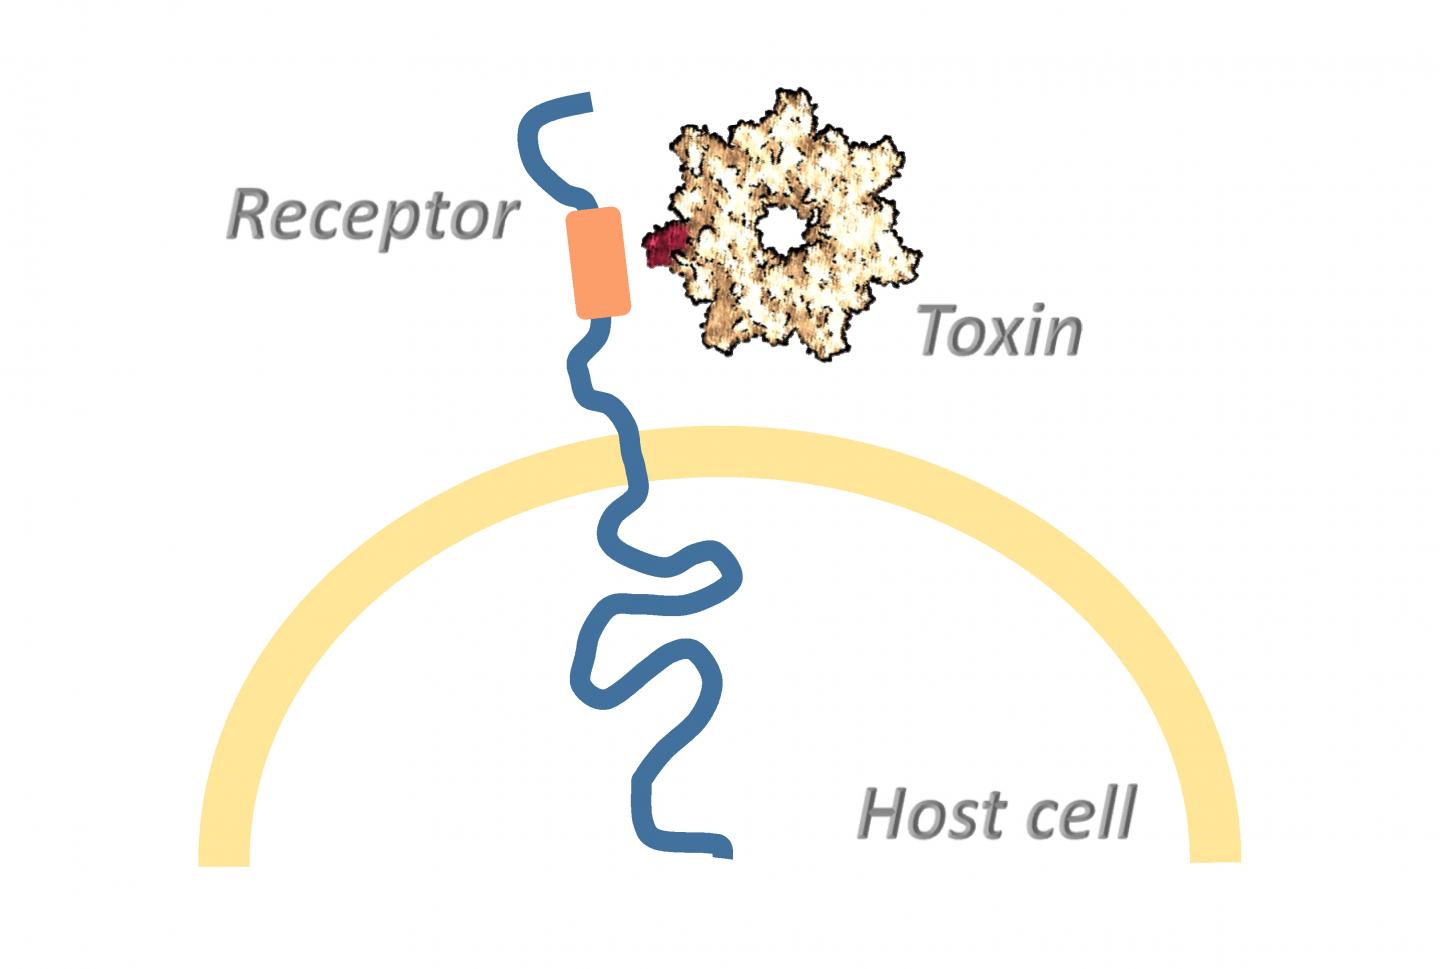 How Toxins Overcome the Cell Membrane